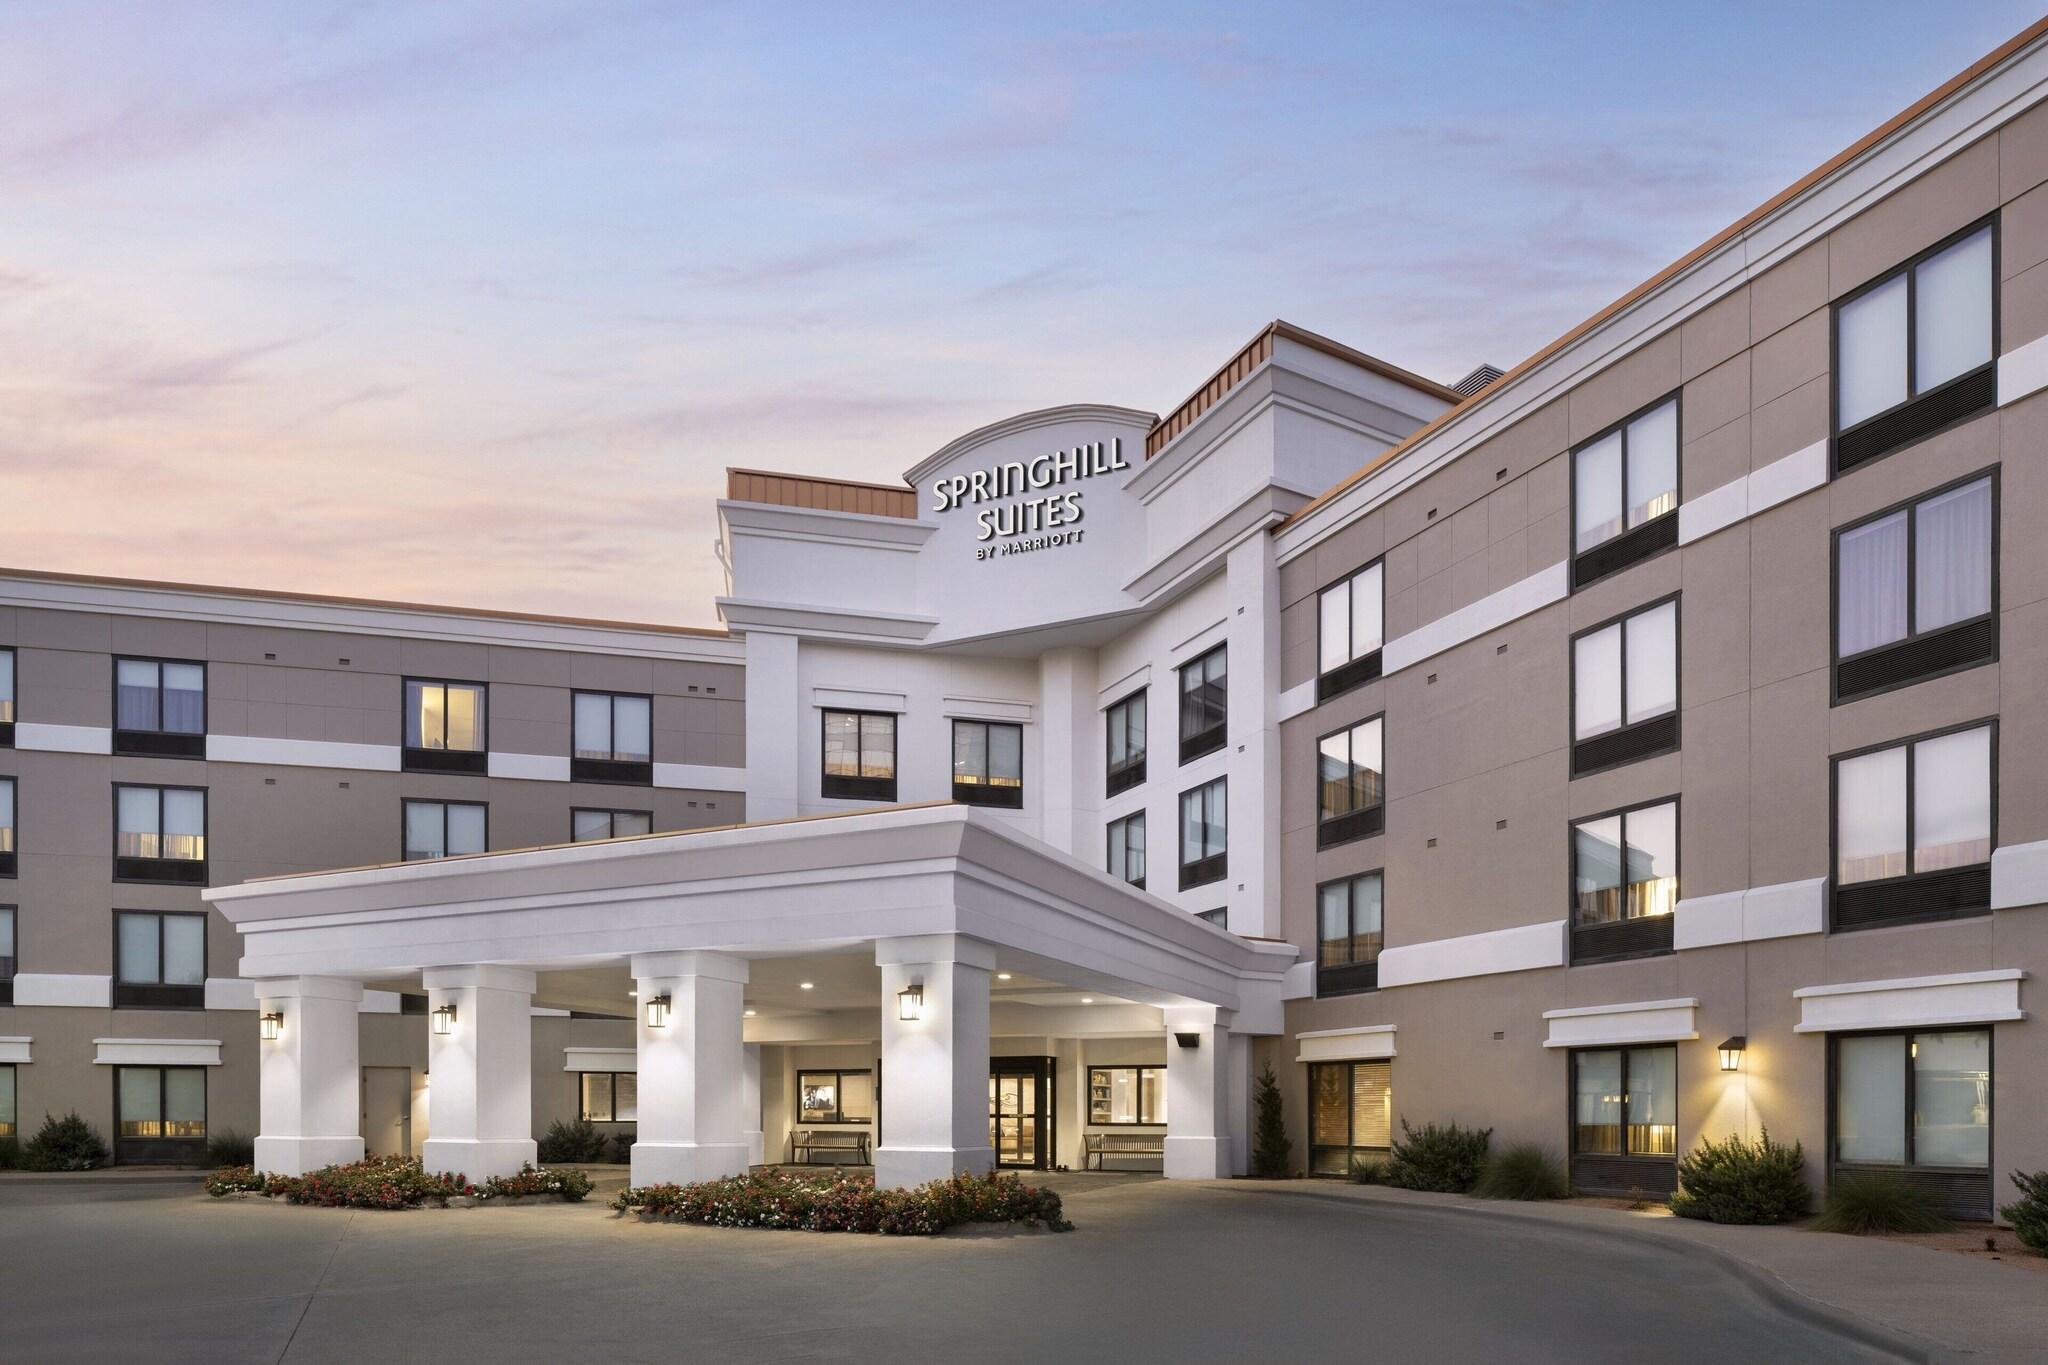 SpringHill Suites by Marriott Fort Worth University image